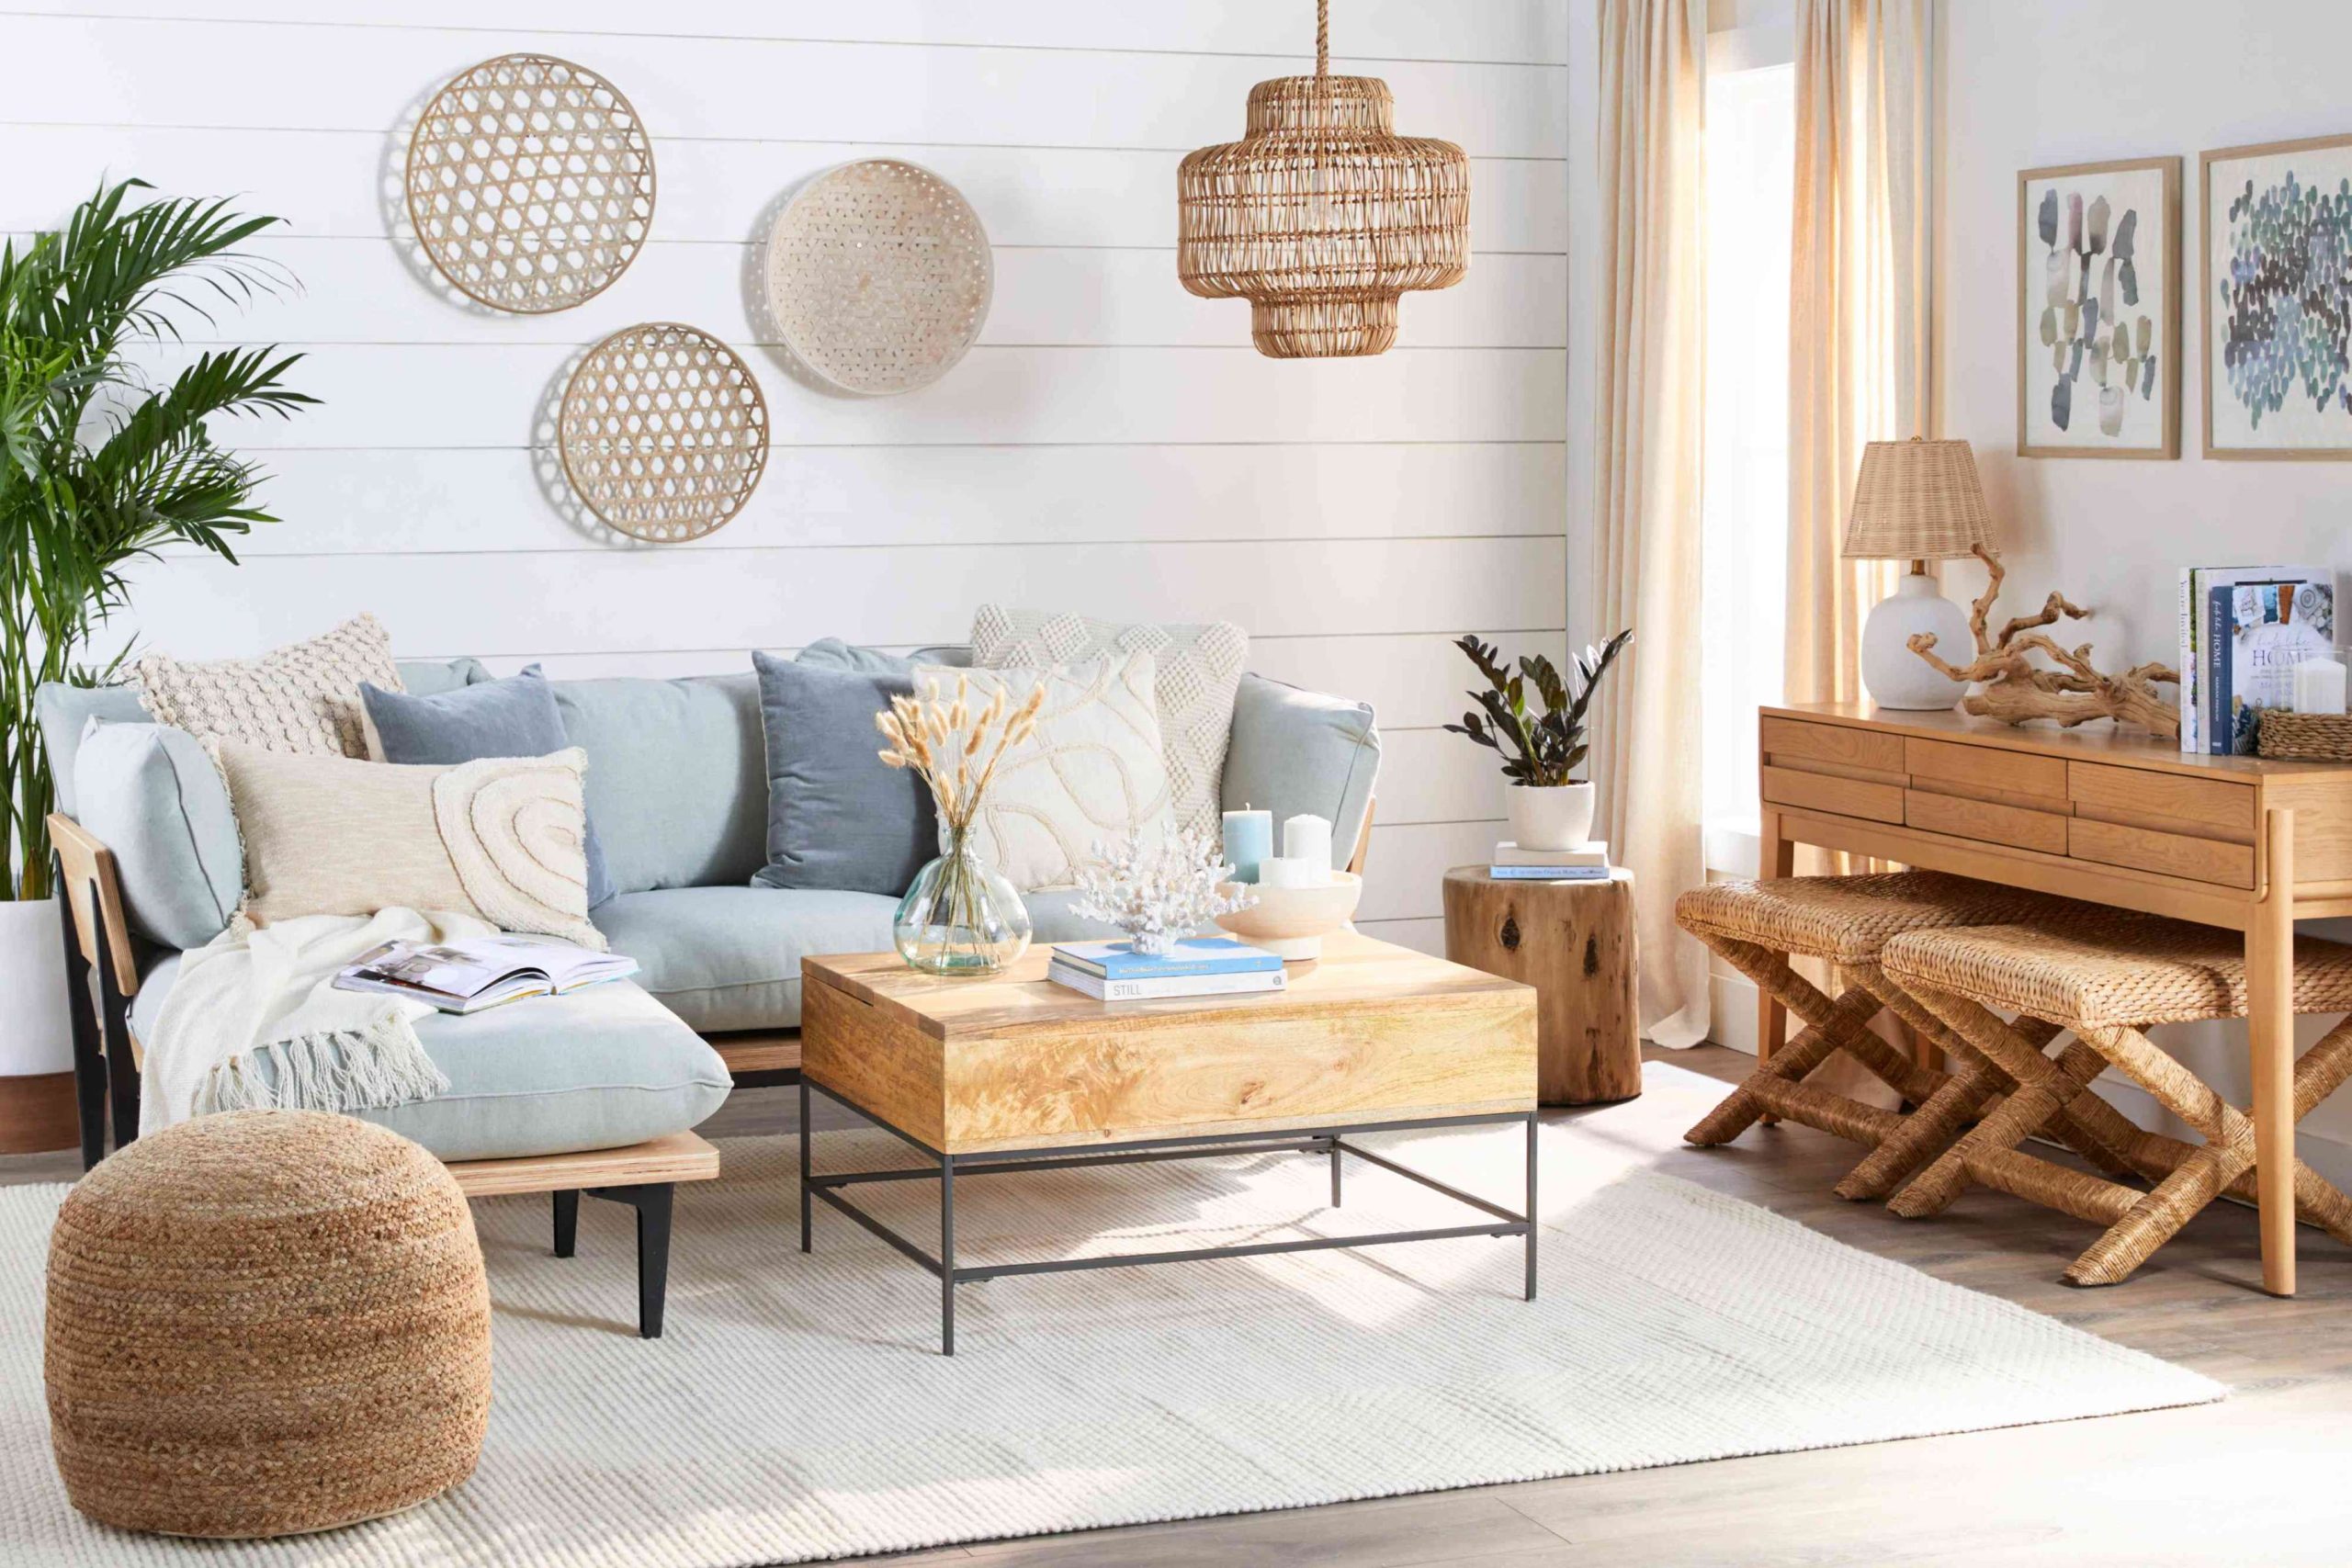 Beach Color Palettes for Decorating a Seaside Oasis